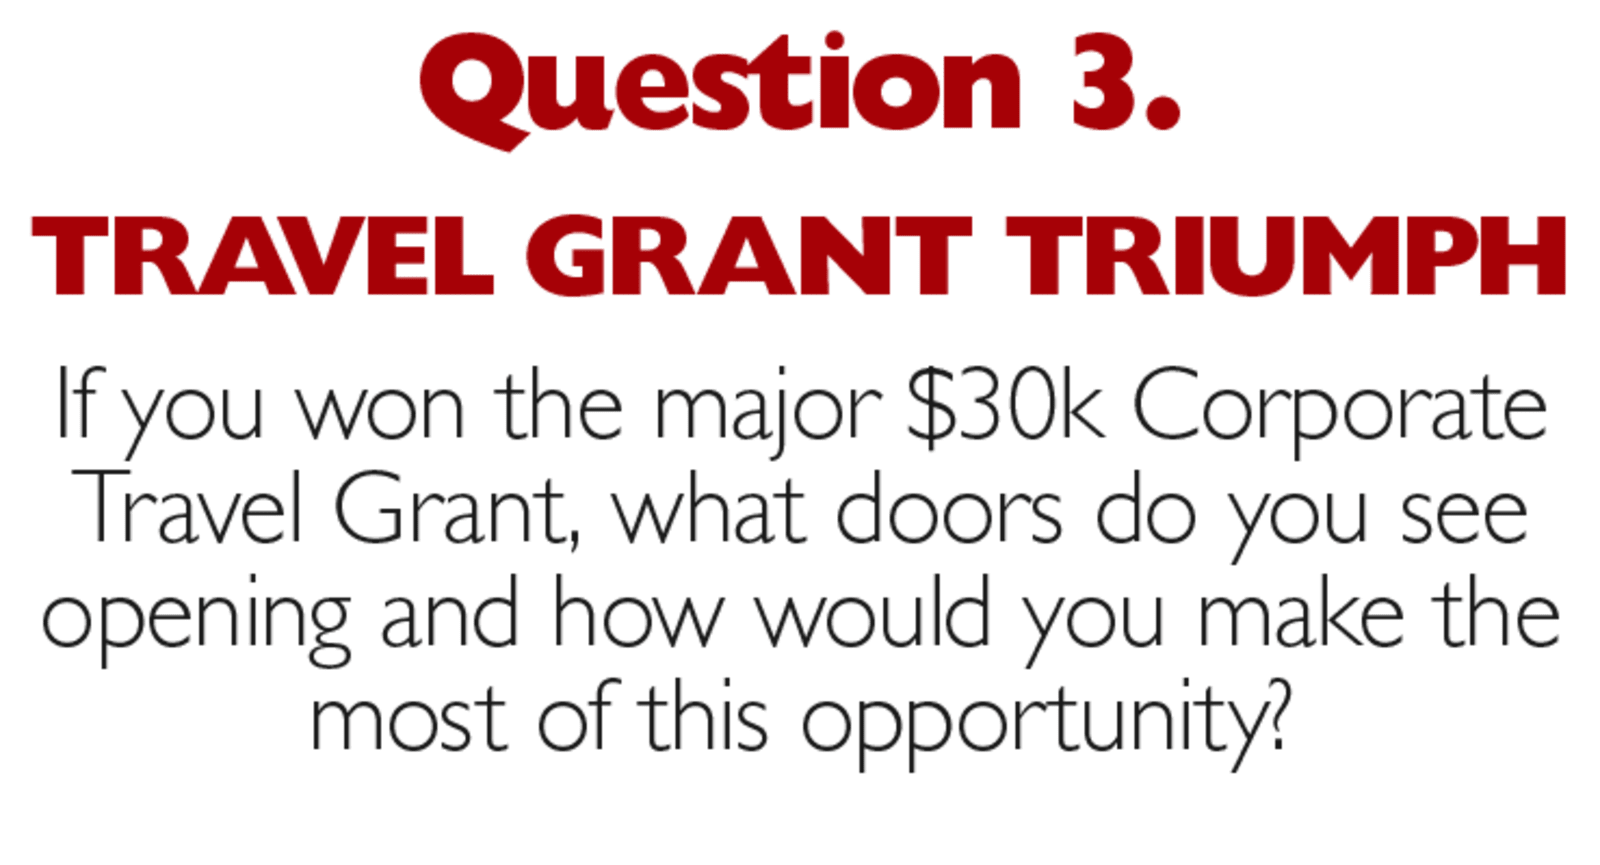 Question 3. Travel Grant Triumph. If you won the major $30k Corporate Travel Grant, what doors do you see opening and how you make the most of this opportunity?